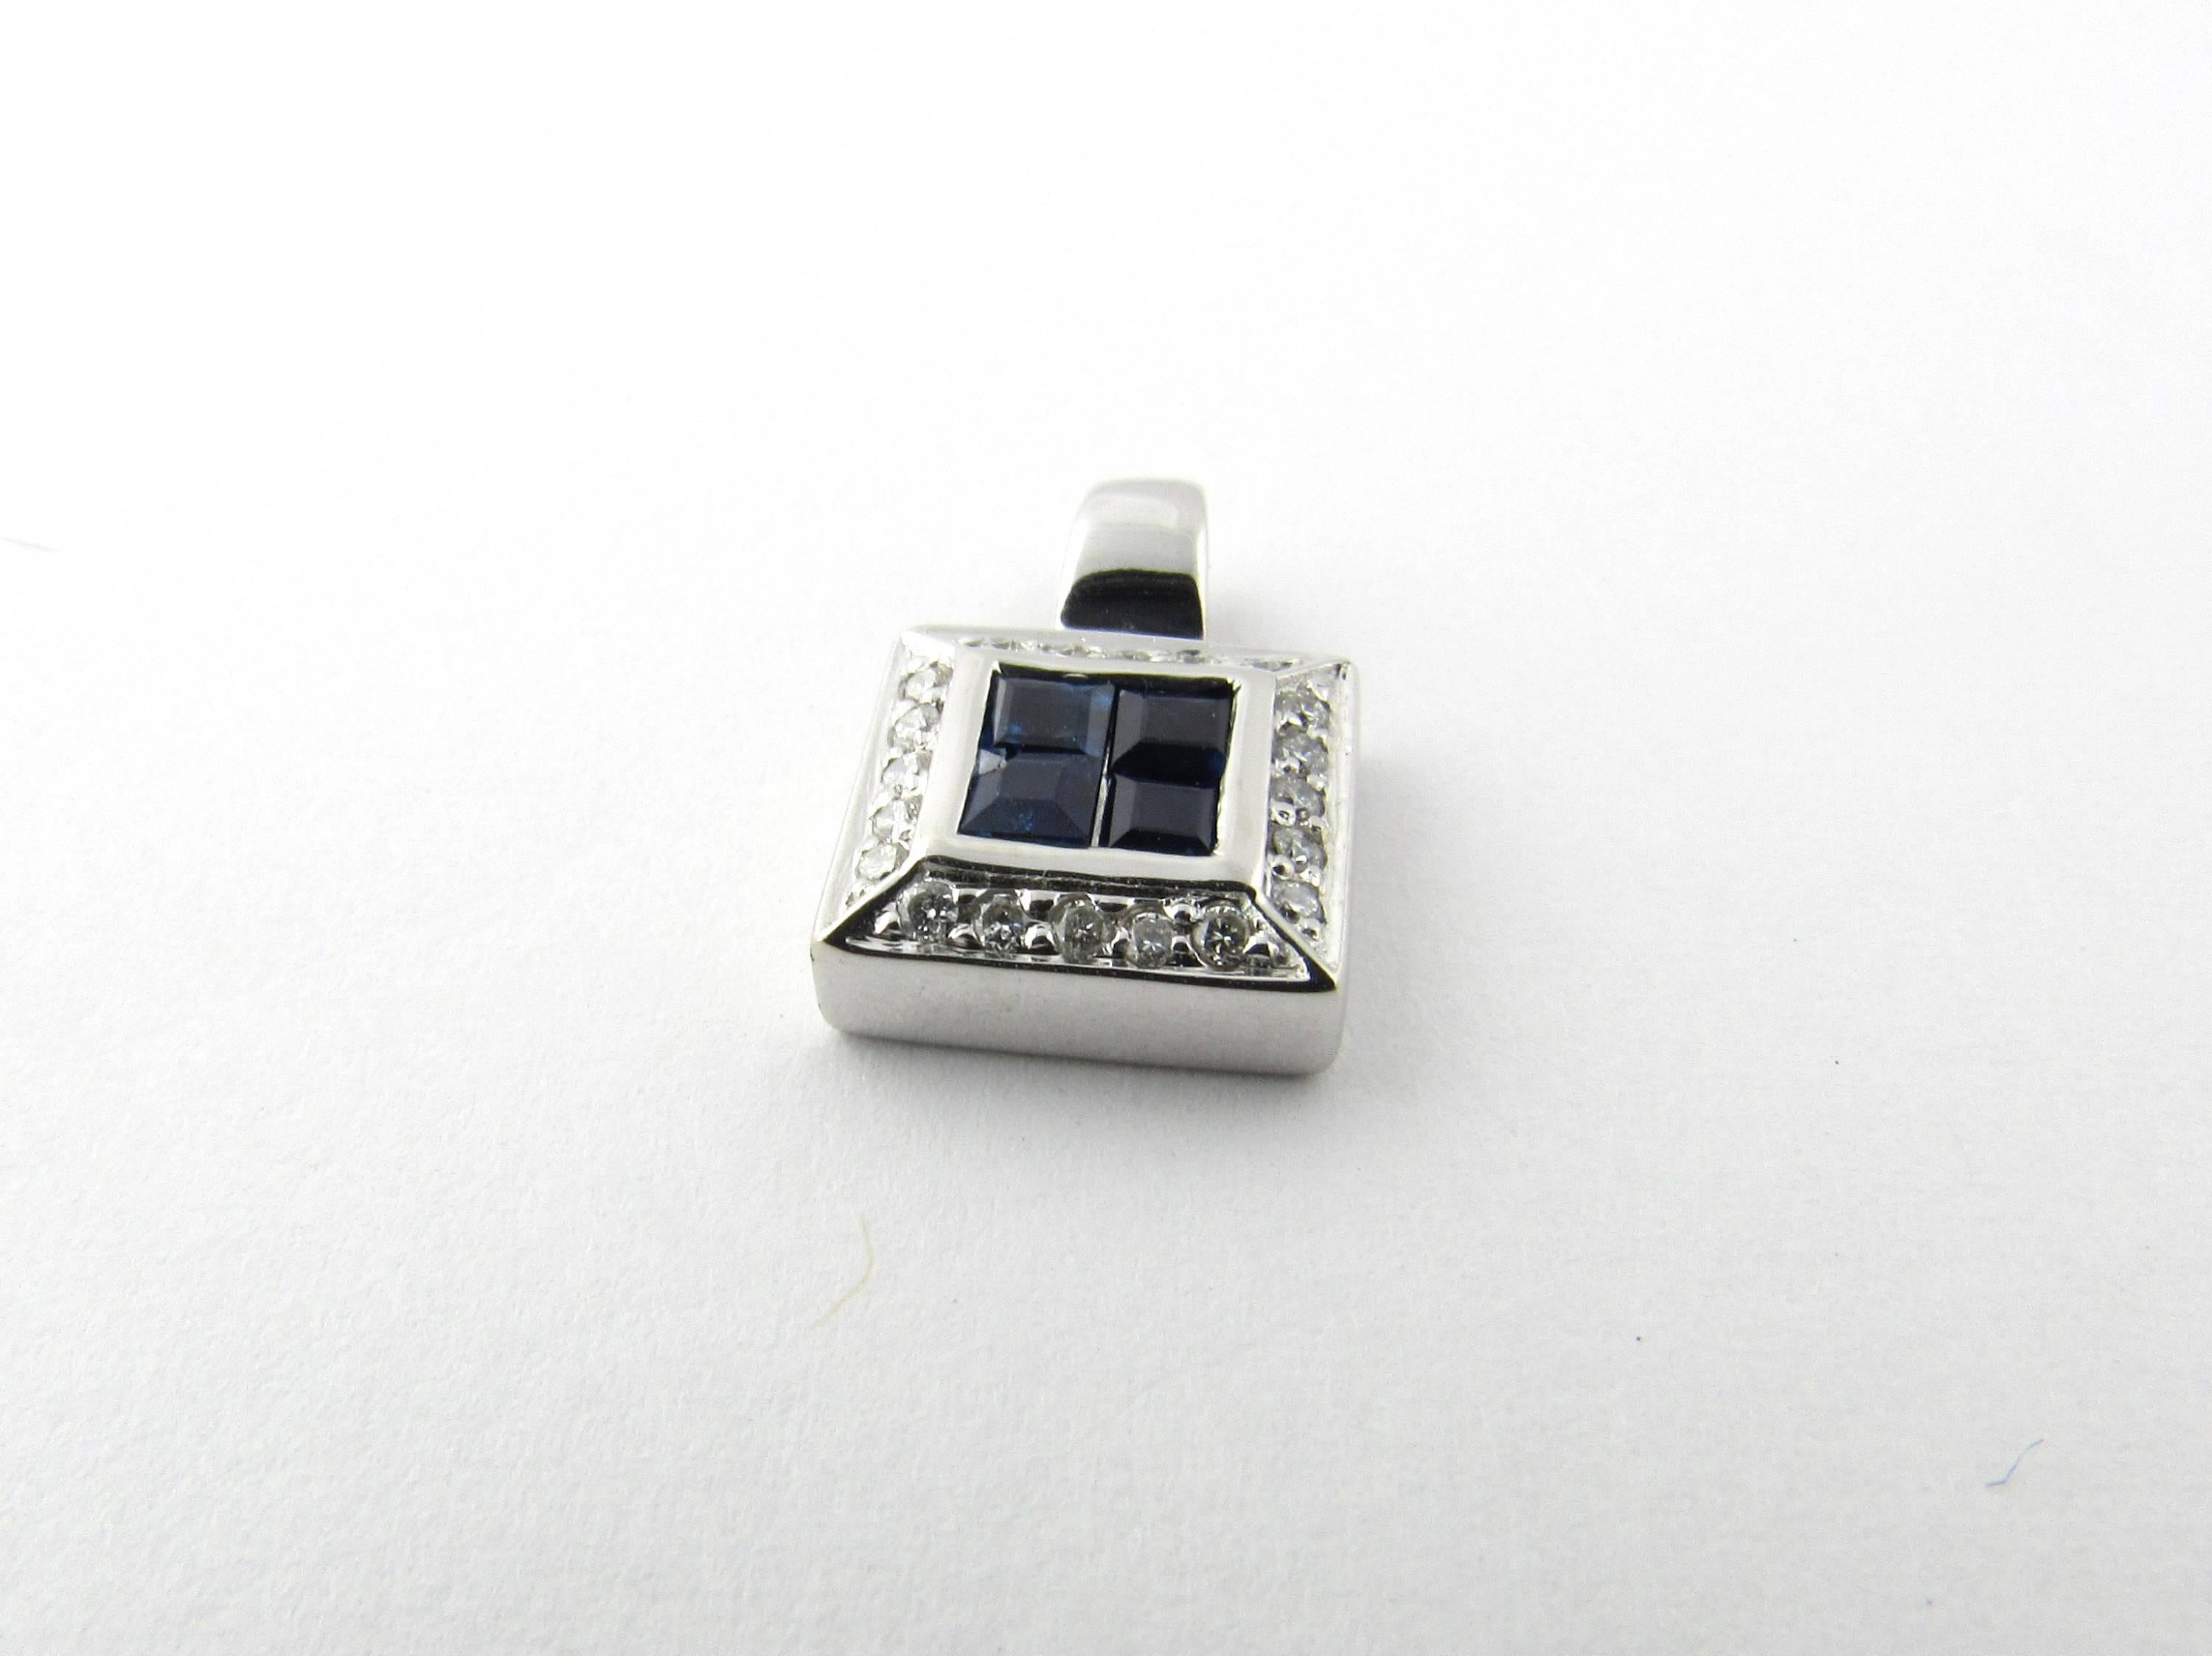 Vintage 14 Karat White Gold Sapphire and Diamond Pendant- 
This beautiful pendant features four square sapphires surrounded by 20 round brilliant cut diamonds in a classic square setting. Approximate total diamond weight: .20 ct. Diamond clarity: